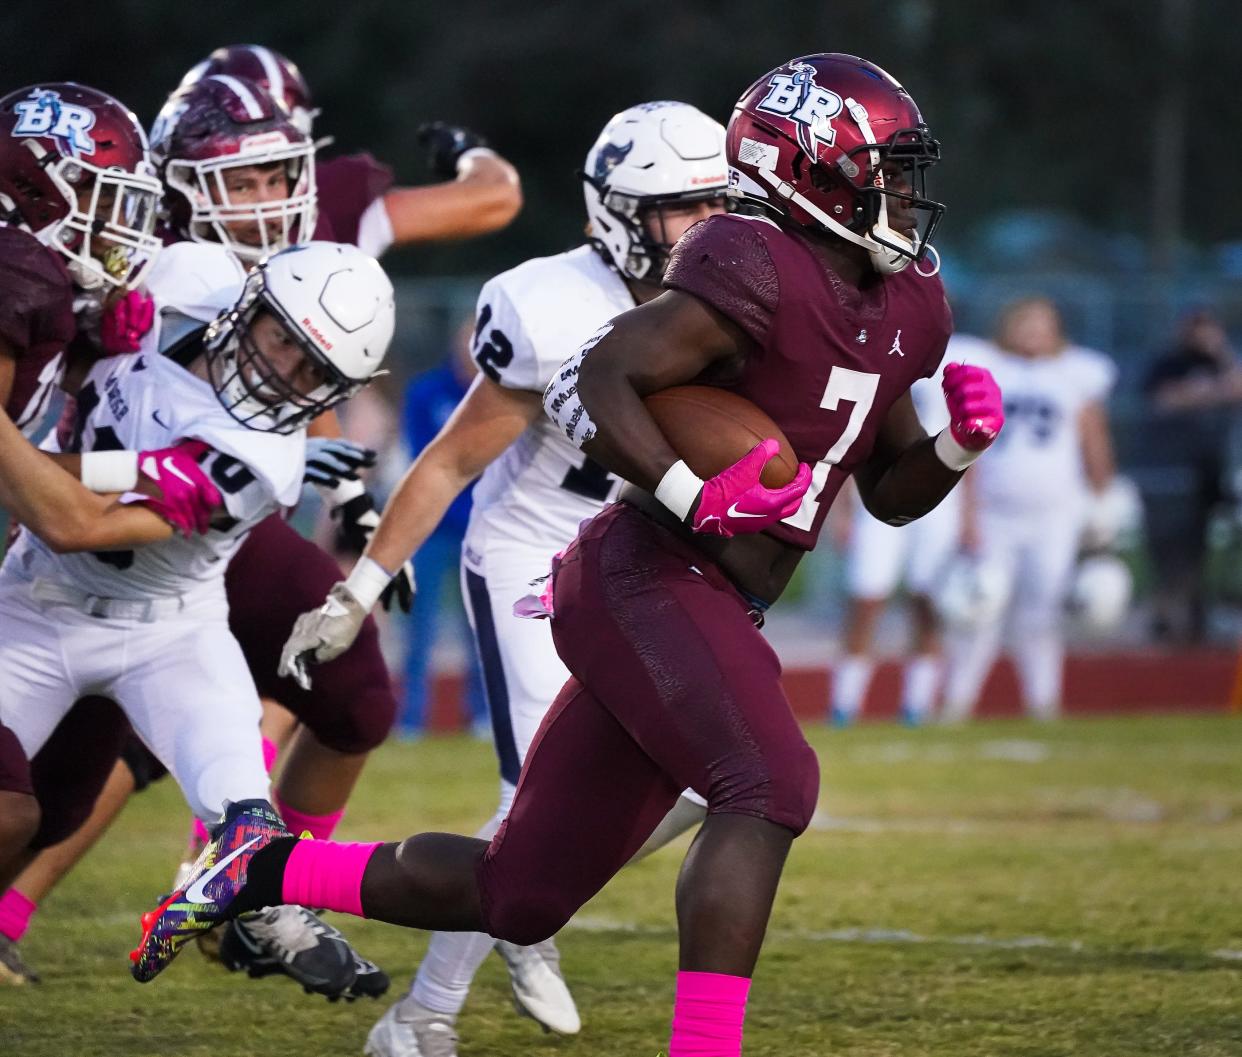 Braden River's Trayvon Pinder runs for yardage against Parrish Community. Pinder had three touchdowns in the fourth quarter to lead the Pirates to a come-from-behind win over the Bulls.